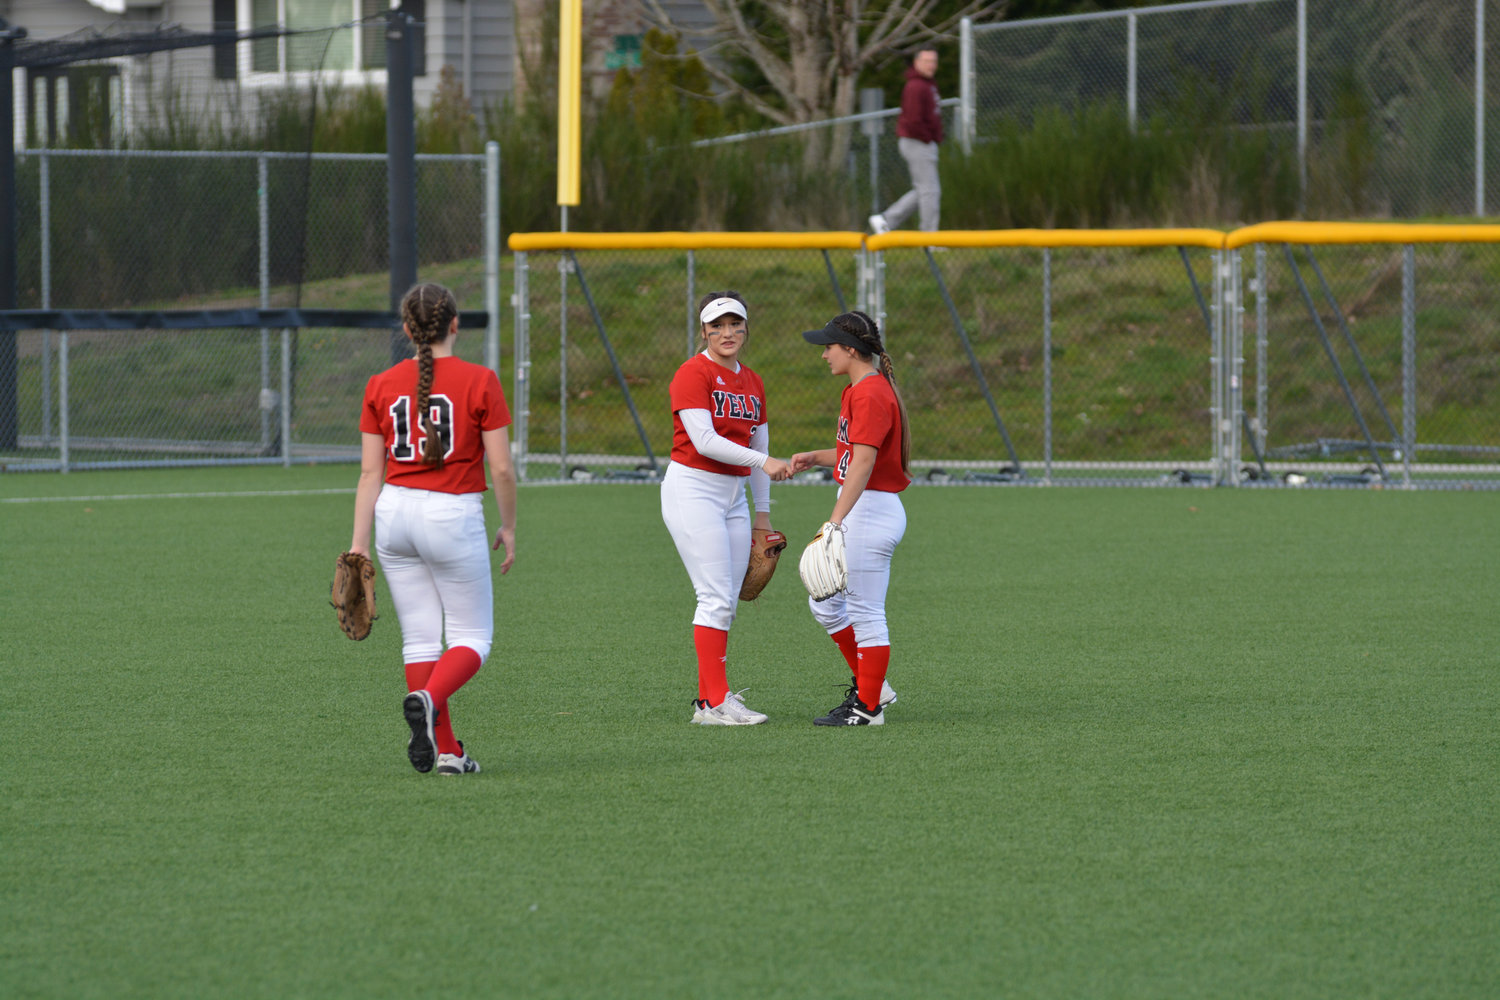 The Yelm outfield meets in between outs on Friday, March 25 at Bellevue College.